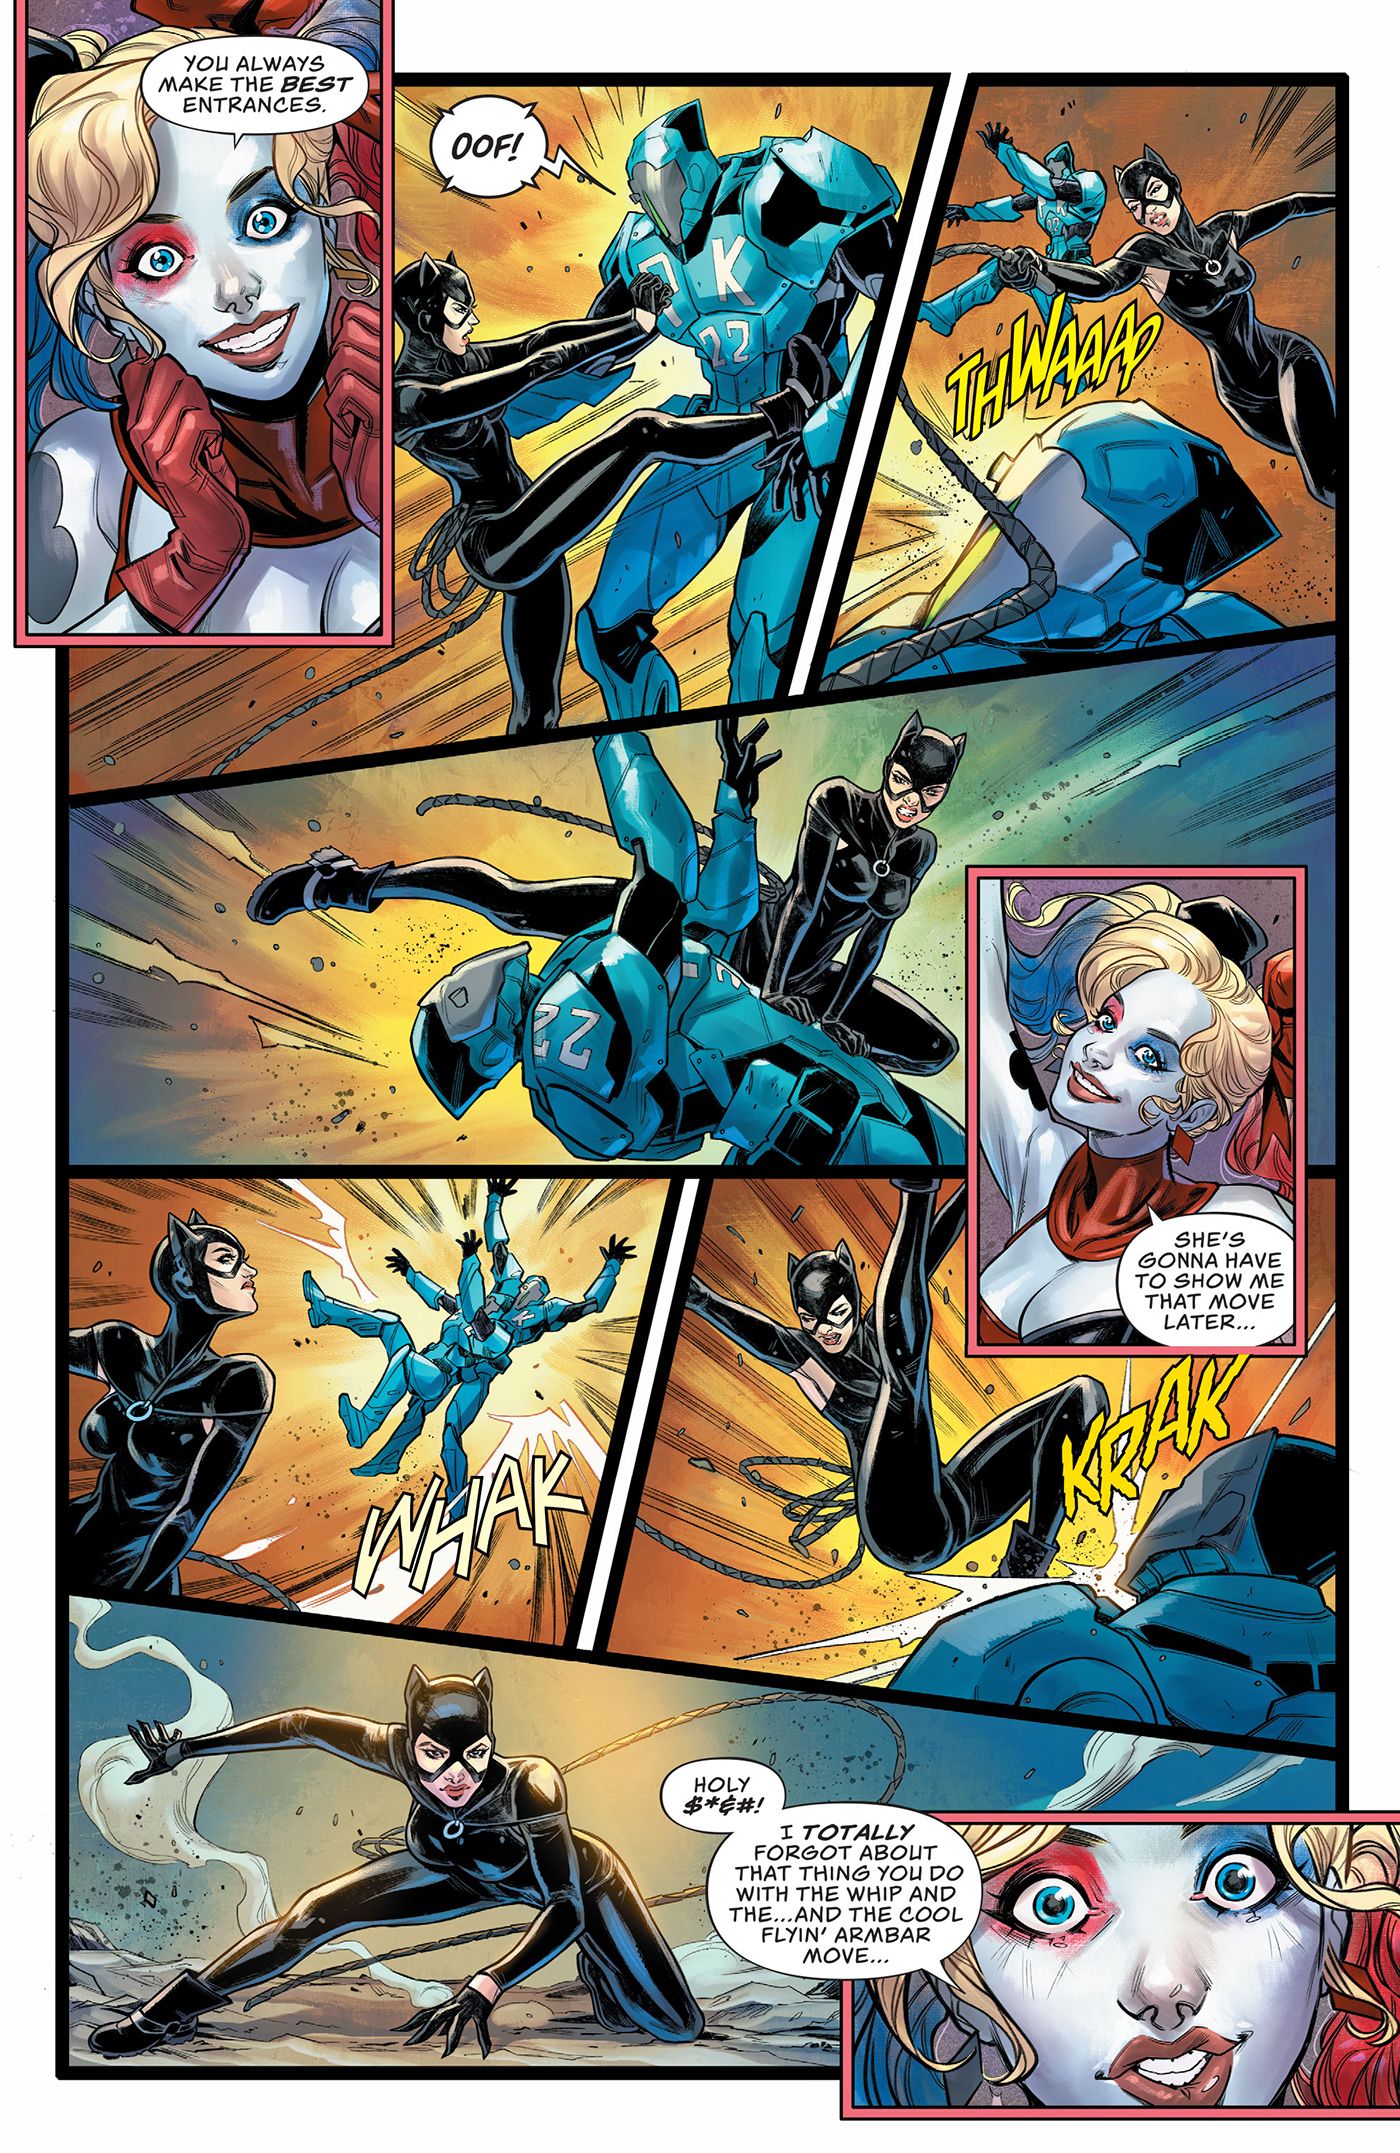 Catwoman defeats the peacekeepers while Harley watches.